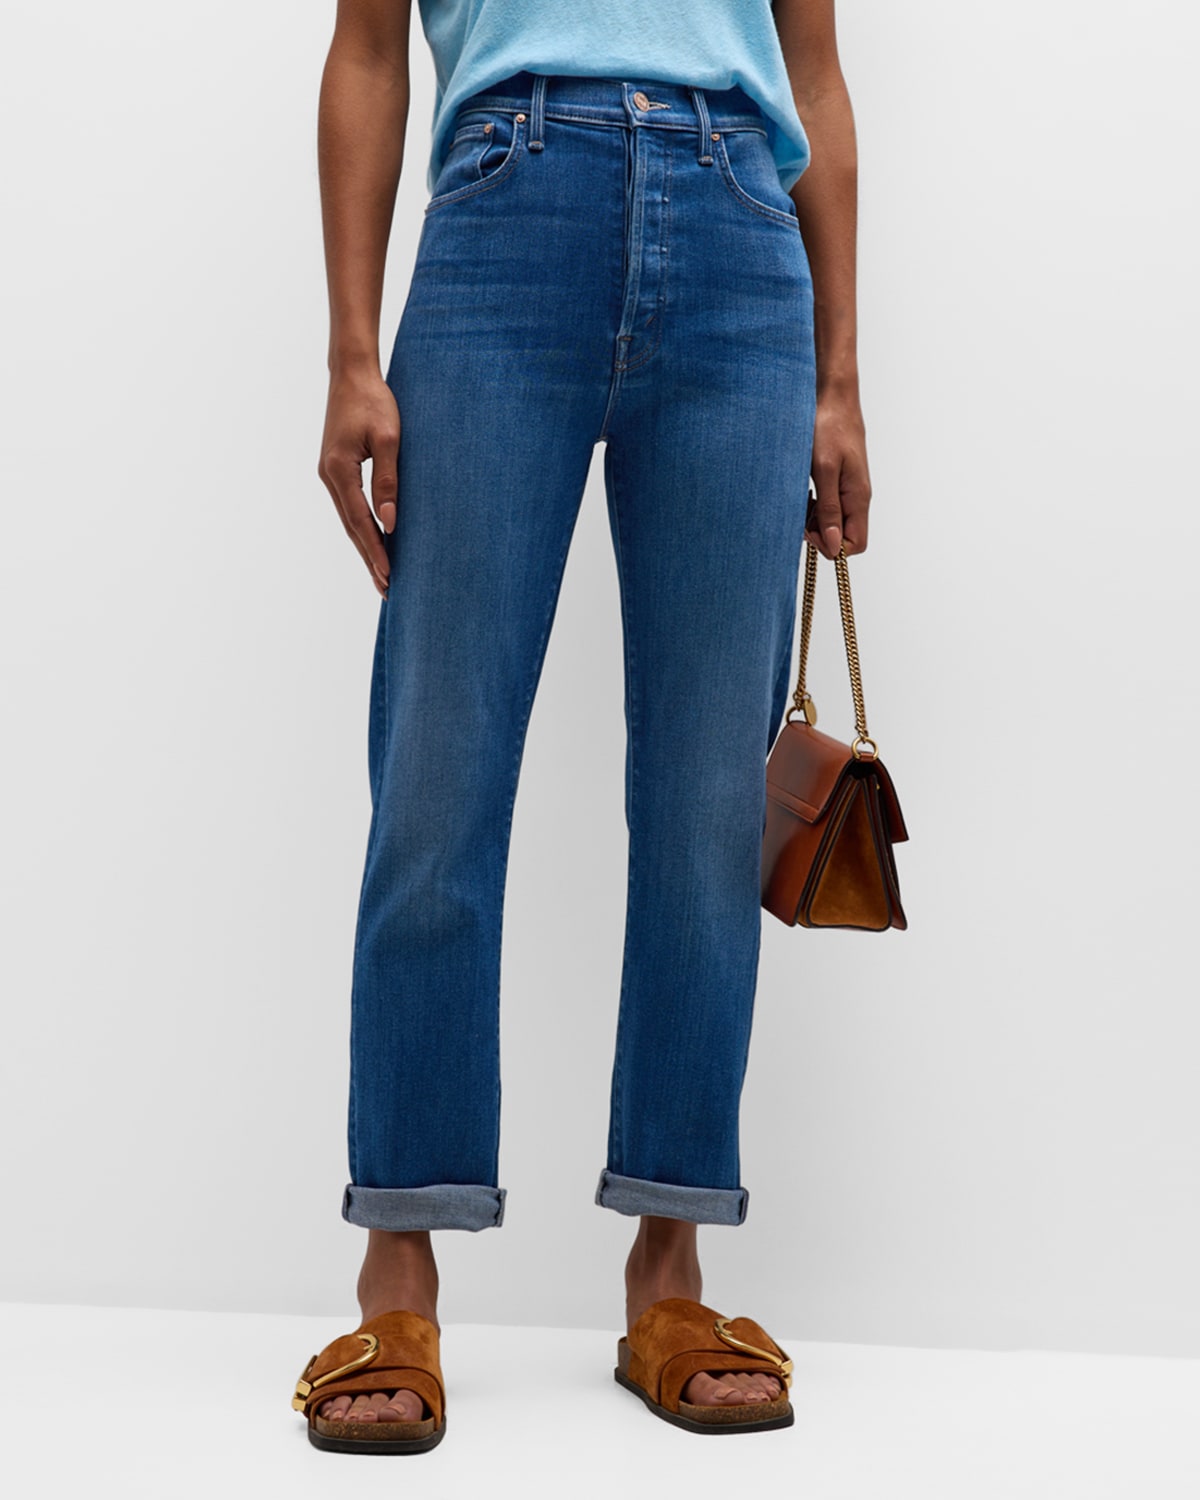 The High Waisted Hiker Hover Jeans